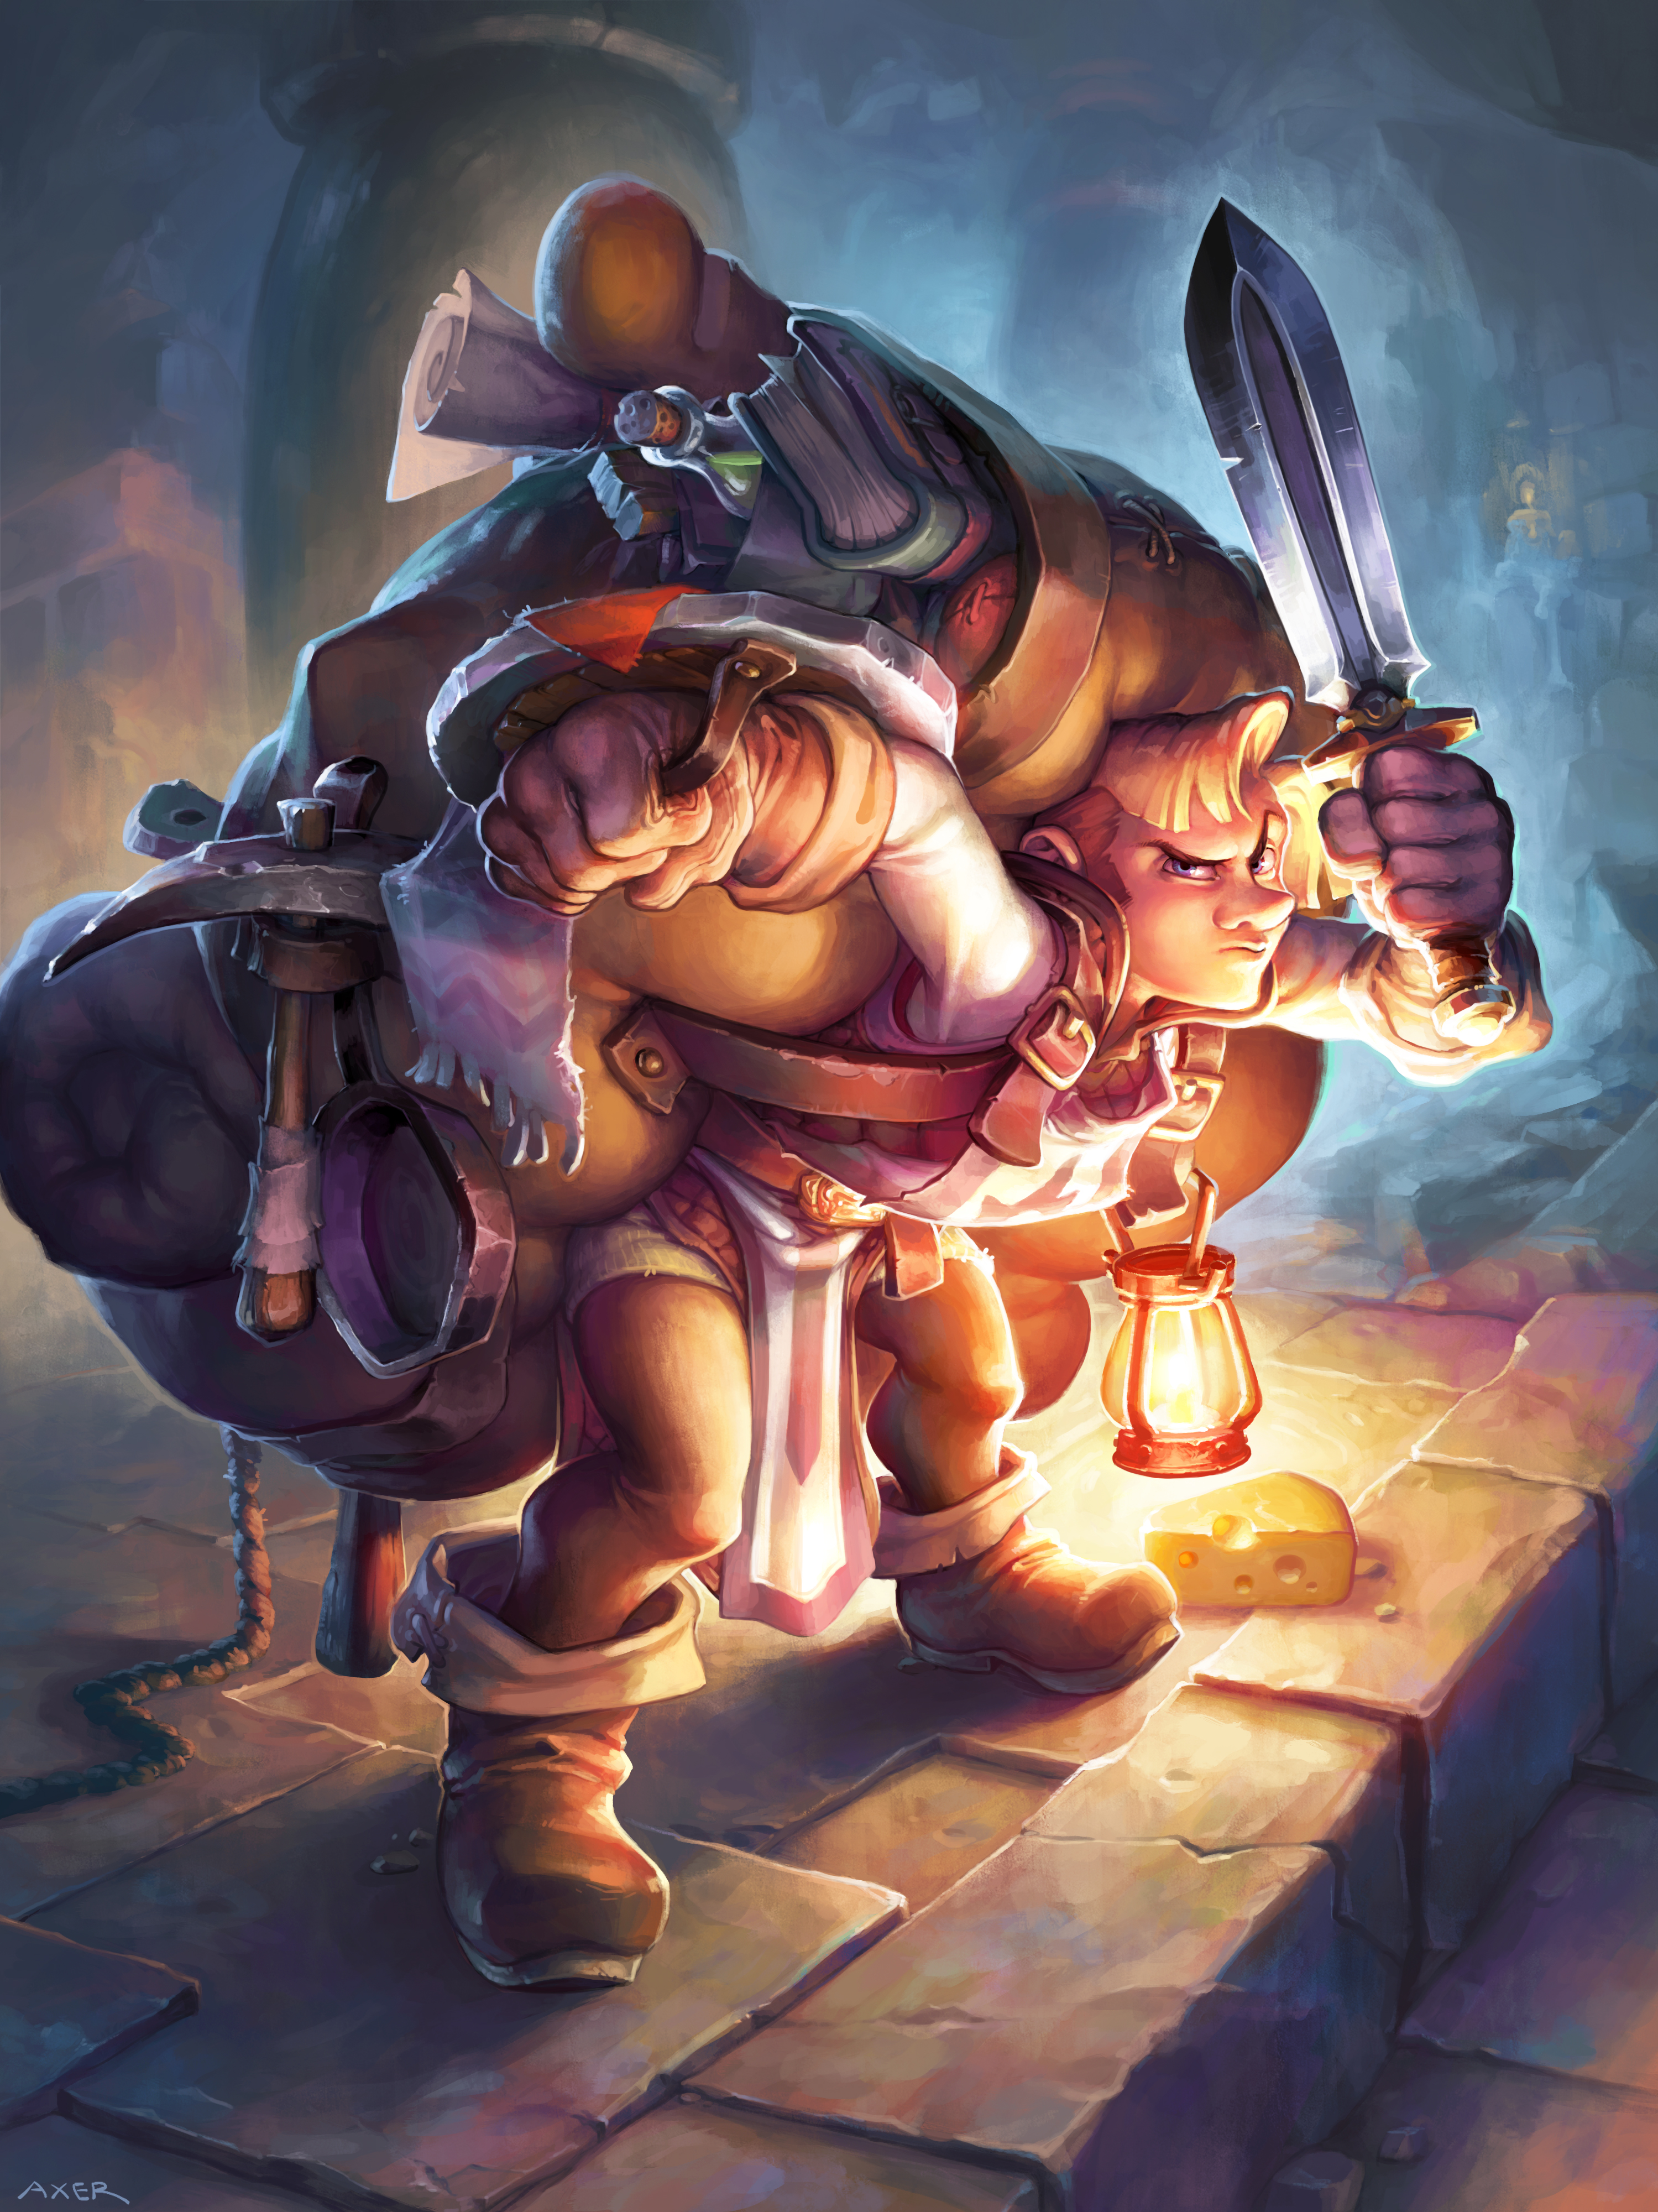 General 2999x4000 Hearthstone: Heroes of Warcraft Hearthstone: Kobolds and Catacombs video games